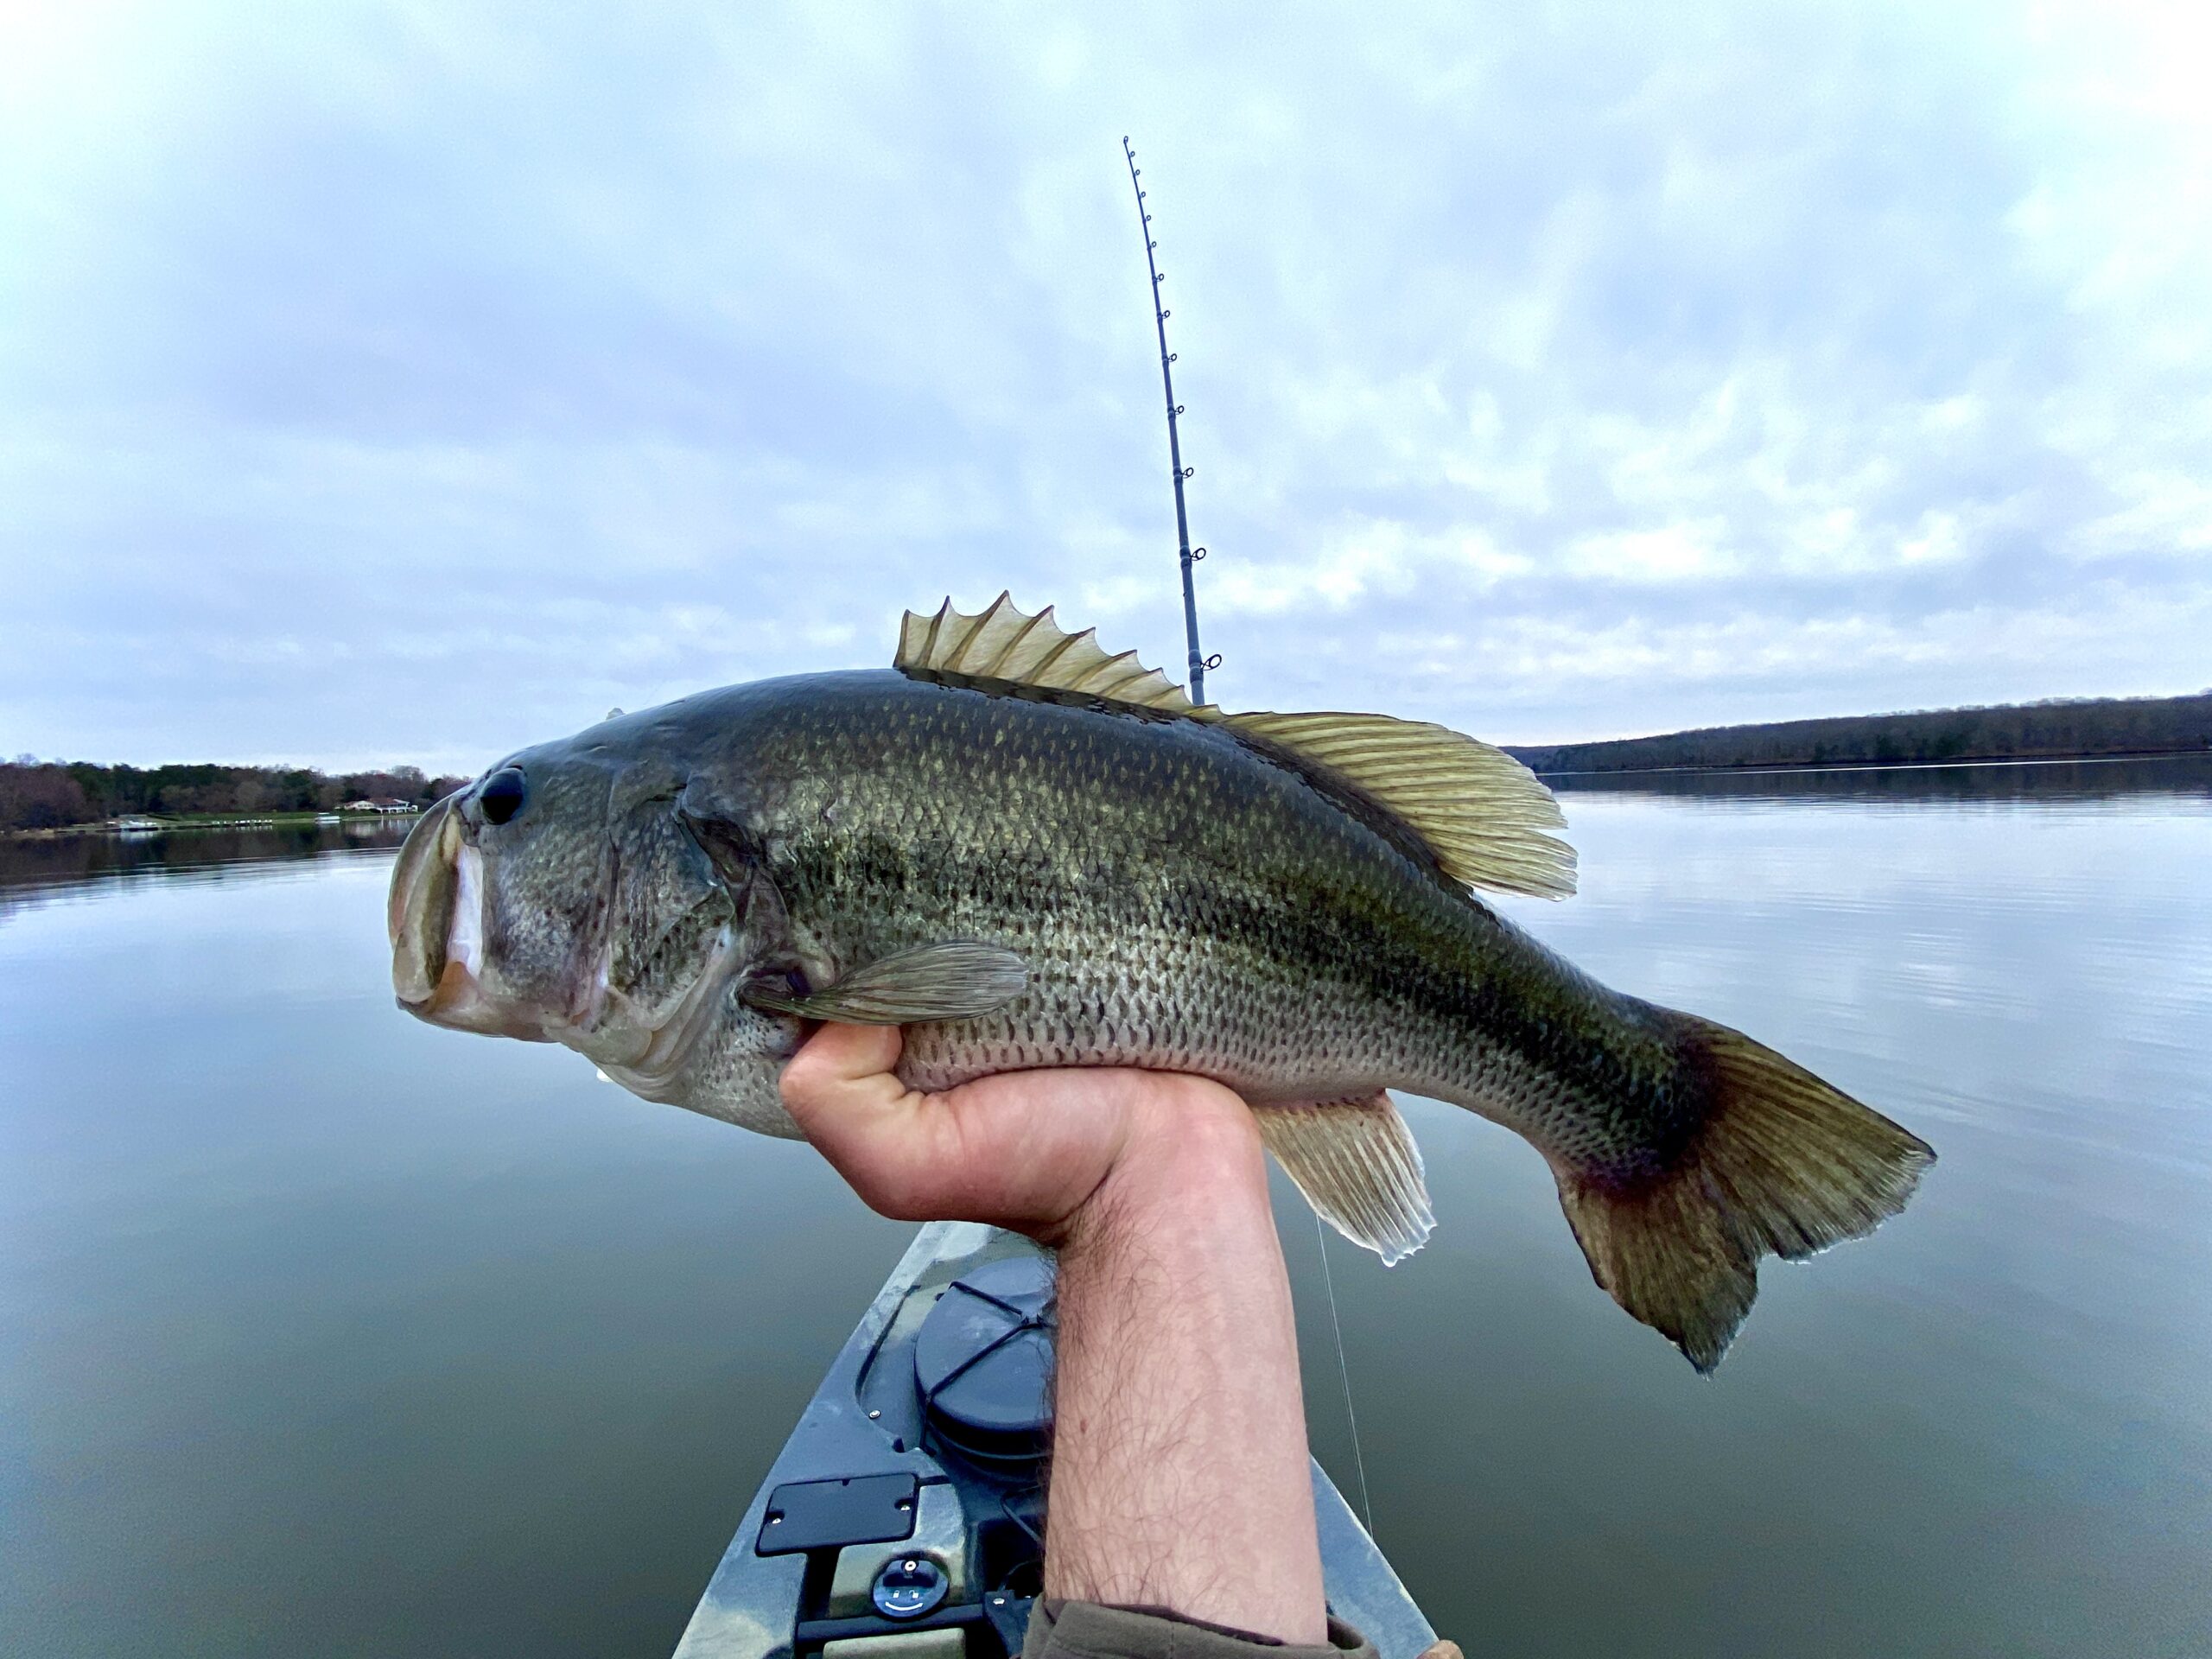 A 6.8 pound bass caught on the Dobyns 806